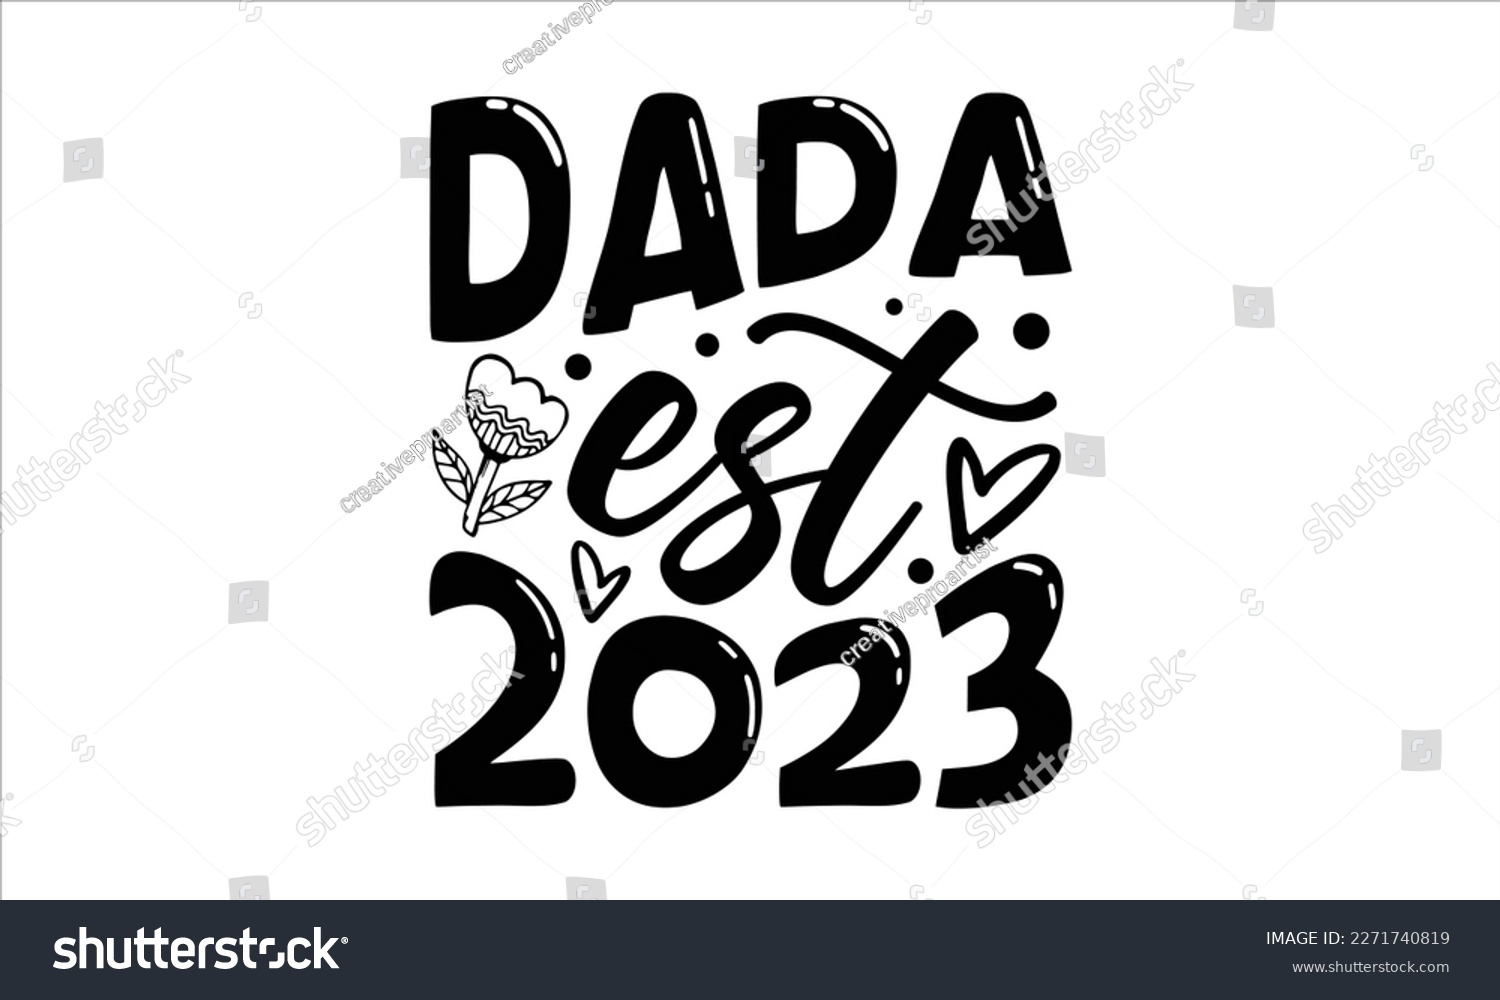 SVG of Dada est 2023- Father's Day svg design, Hand drawn lettering phrase isolated on white background, Illustration for prints on t-shirts and bags, posters, cards eps 10. svg